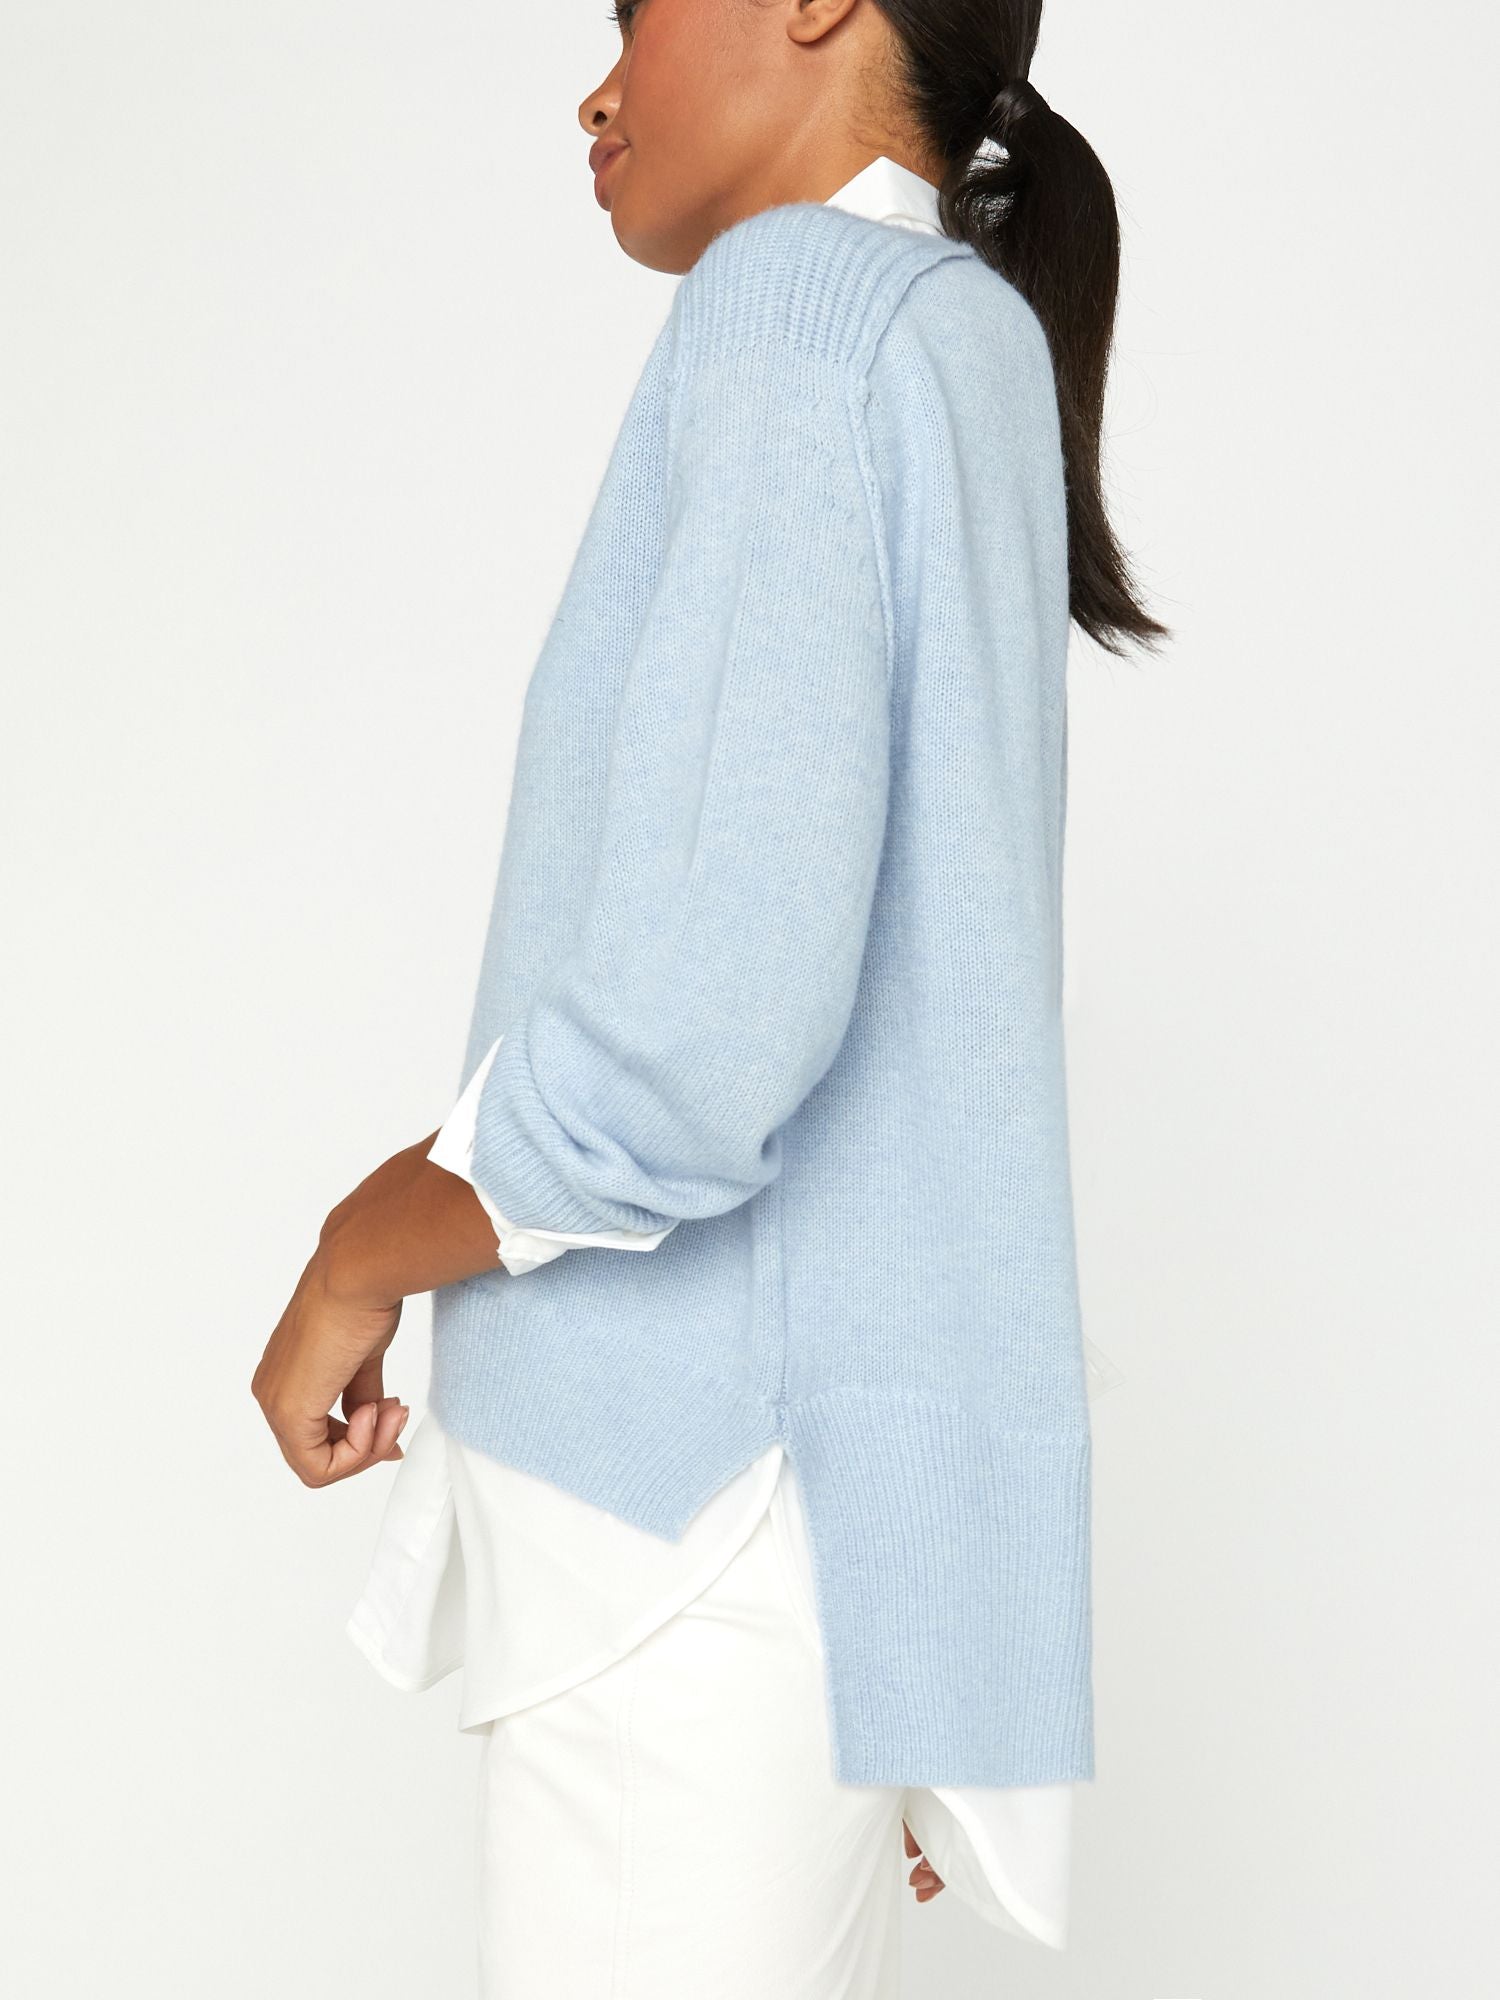 Looker light blue layered v-neck sweater side view 3